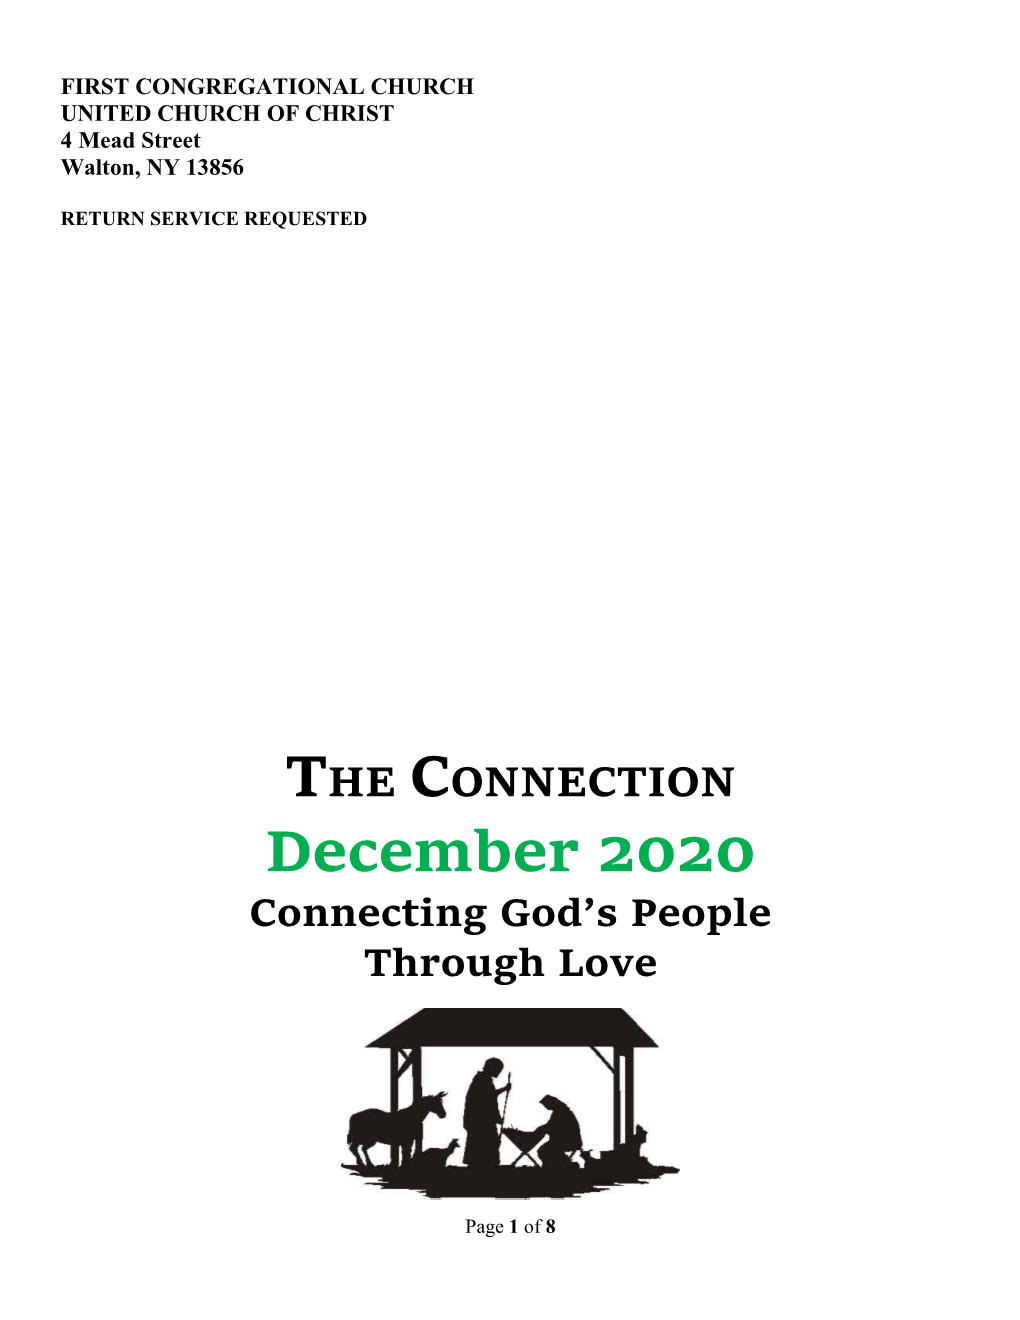 THE CONNECTION December 2020 Connecting God’S People Through Love